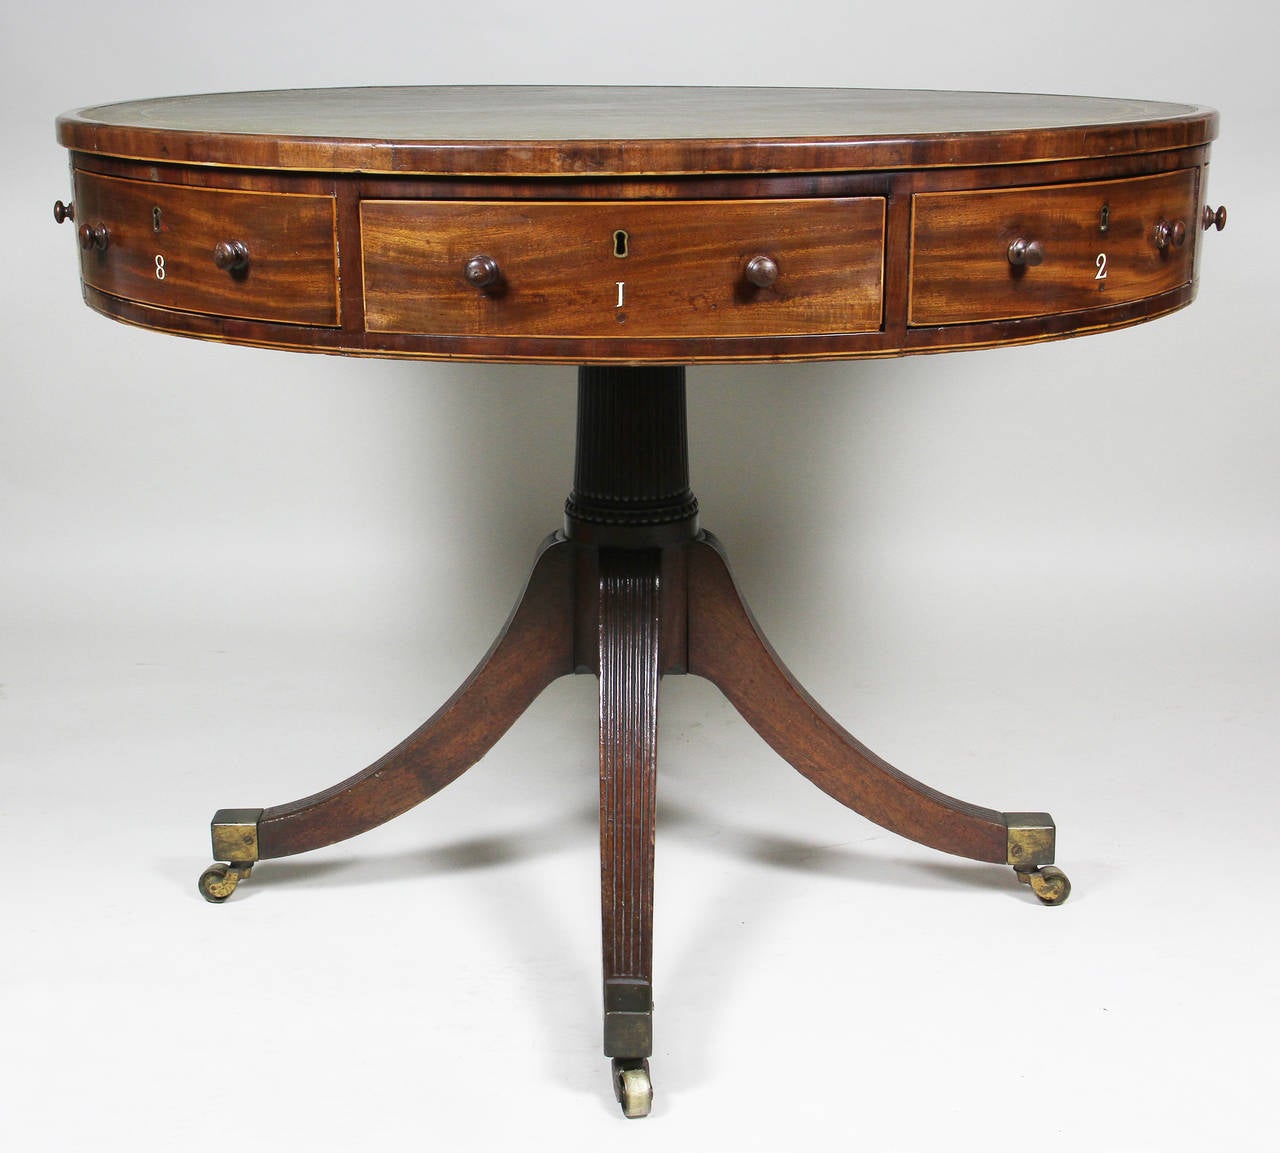 19th Century Regency Mahogany and Inlaid Rent or Drum Table